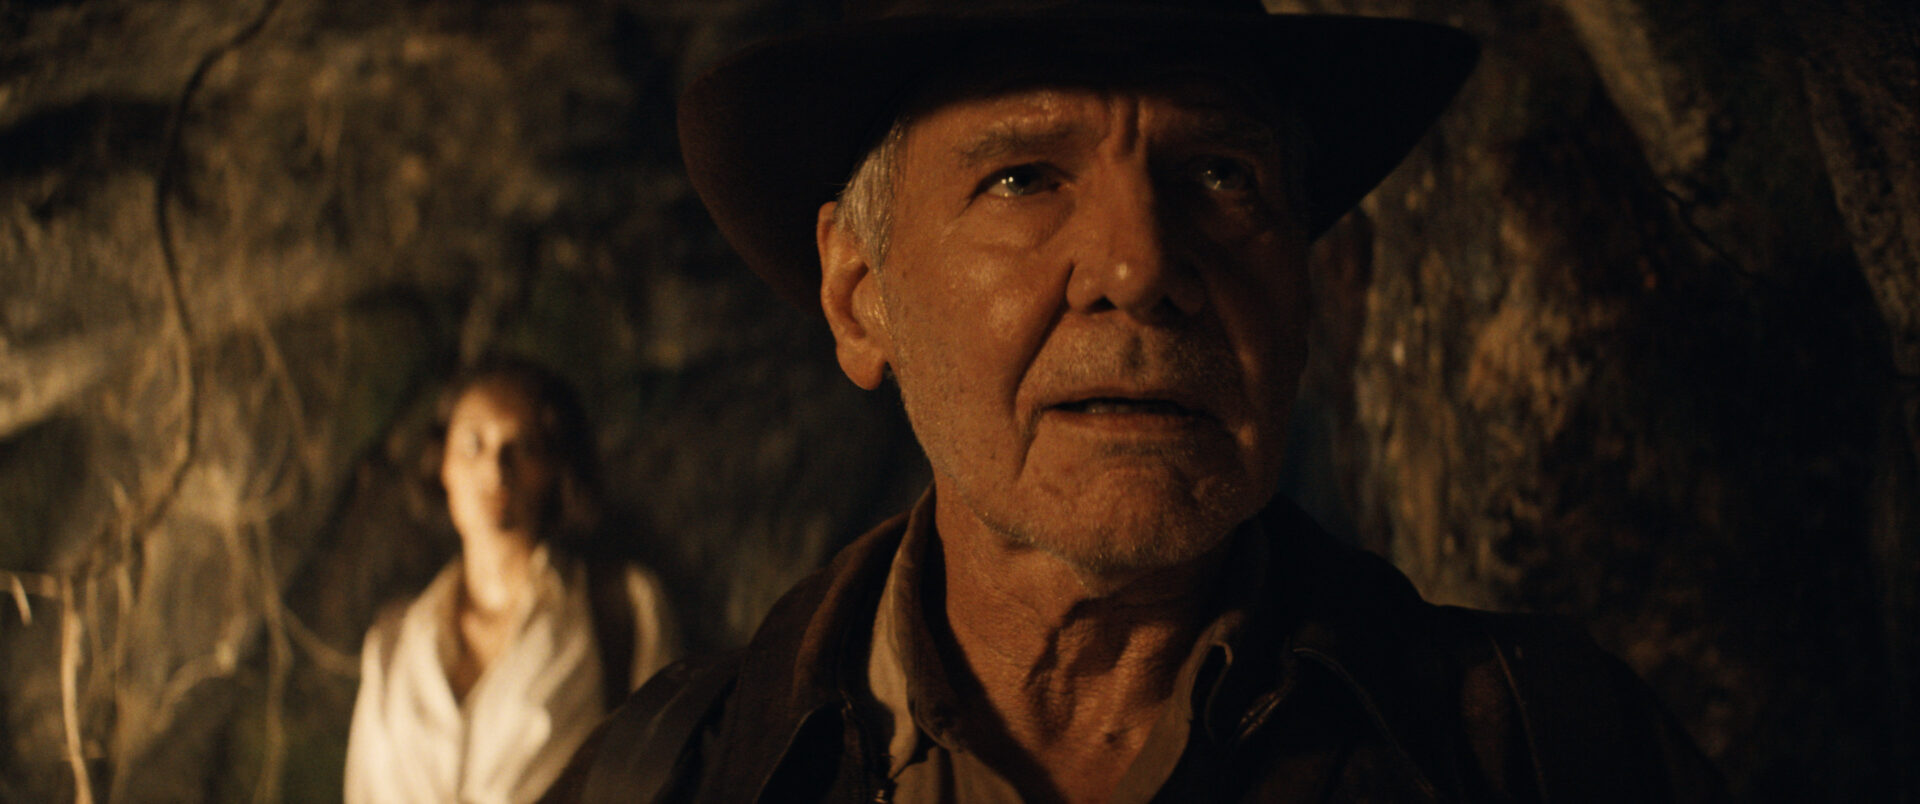 (L-R): Helena (Phoebe Waller-Bridge) and Indiana Jones (Harrison Ford) in Lucasfilm's INDIANA JONES AND THE DIAL OF DESTINY. ©2023 Lucasfilm Ltd. & TM. All Rights Reserved.